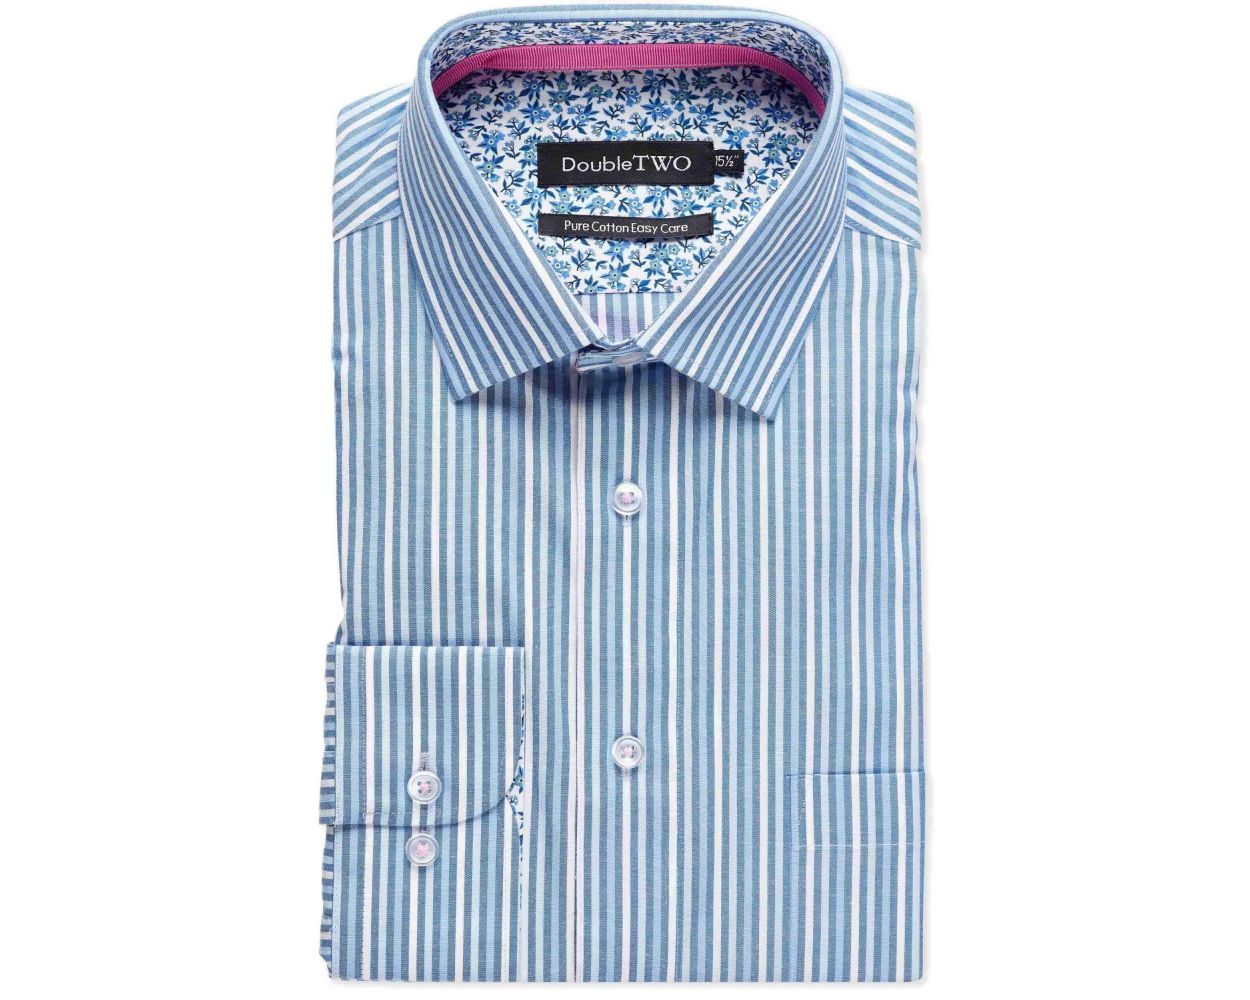 Men's Blue Shaded Stripe Formal Shirt | Double TWO